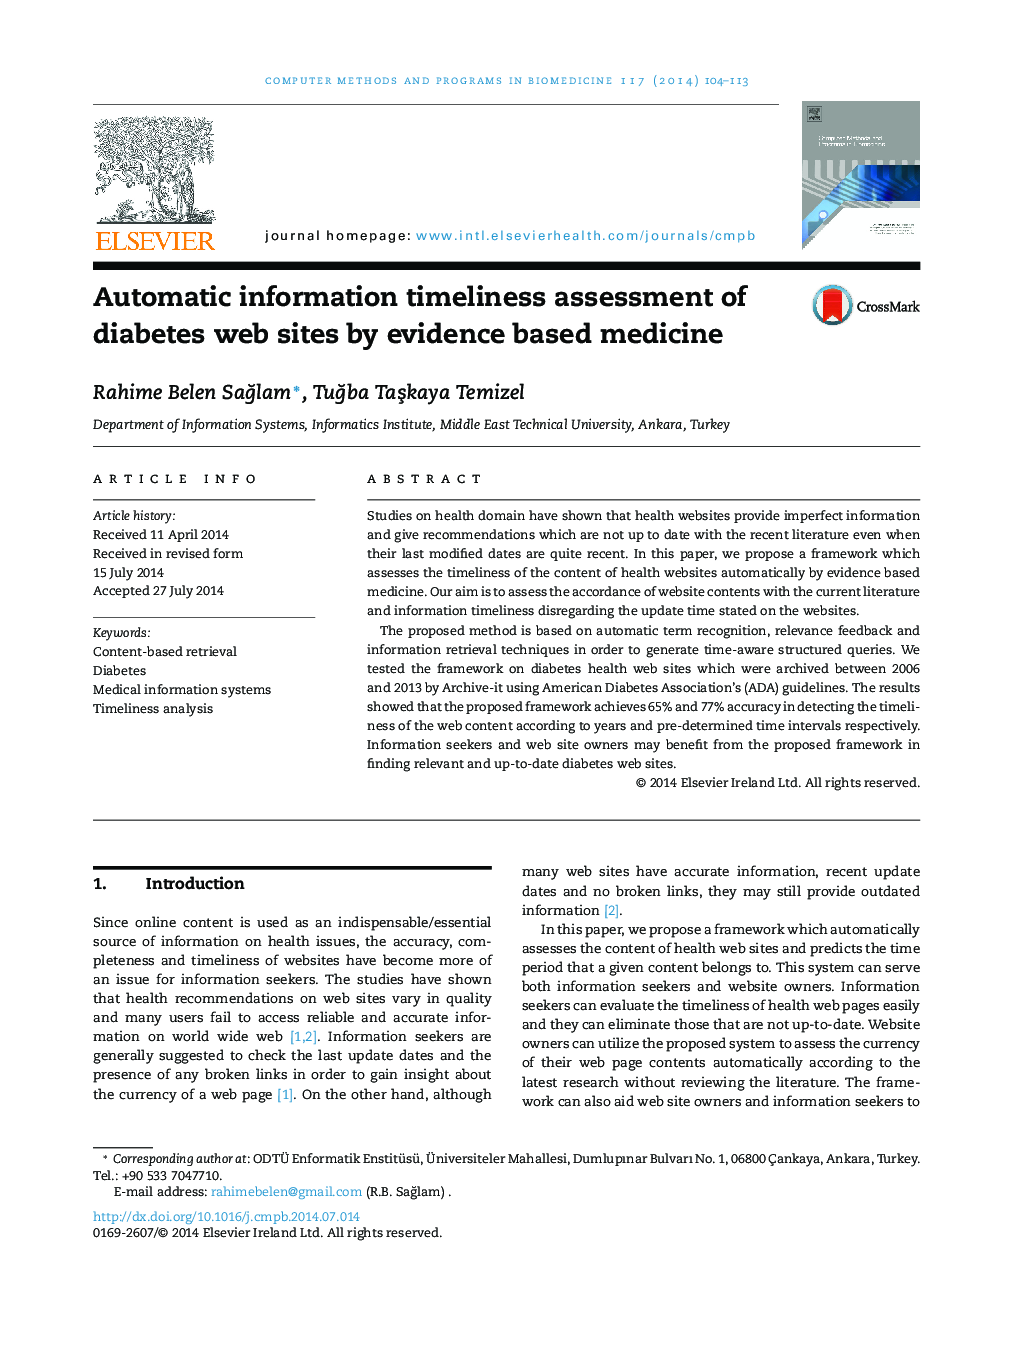 Automatic information timeliness assessment of diabetes web sites by evidence based medicine